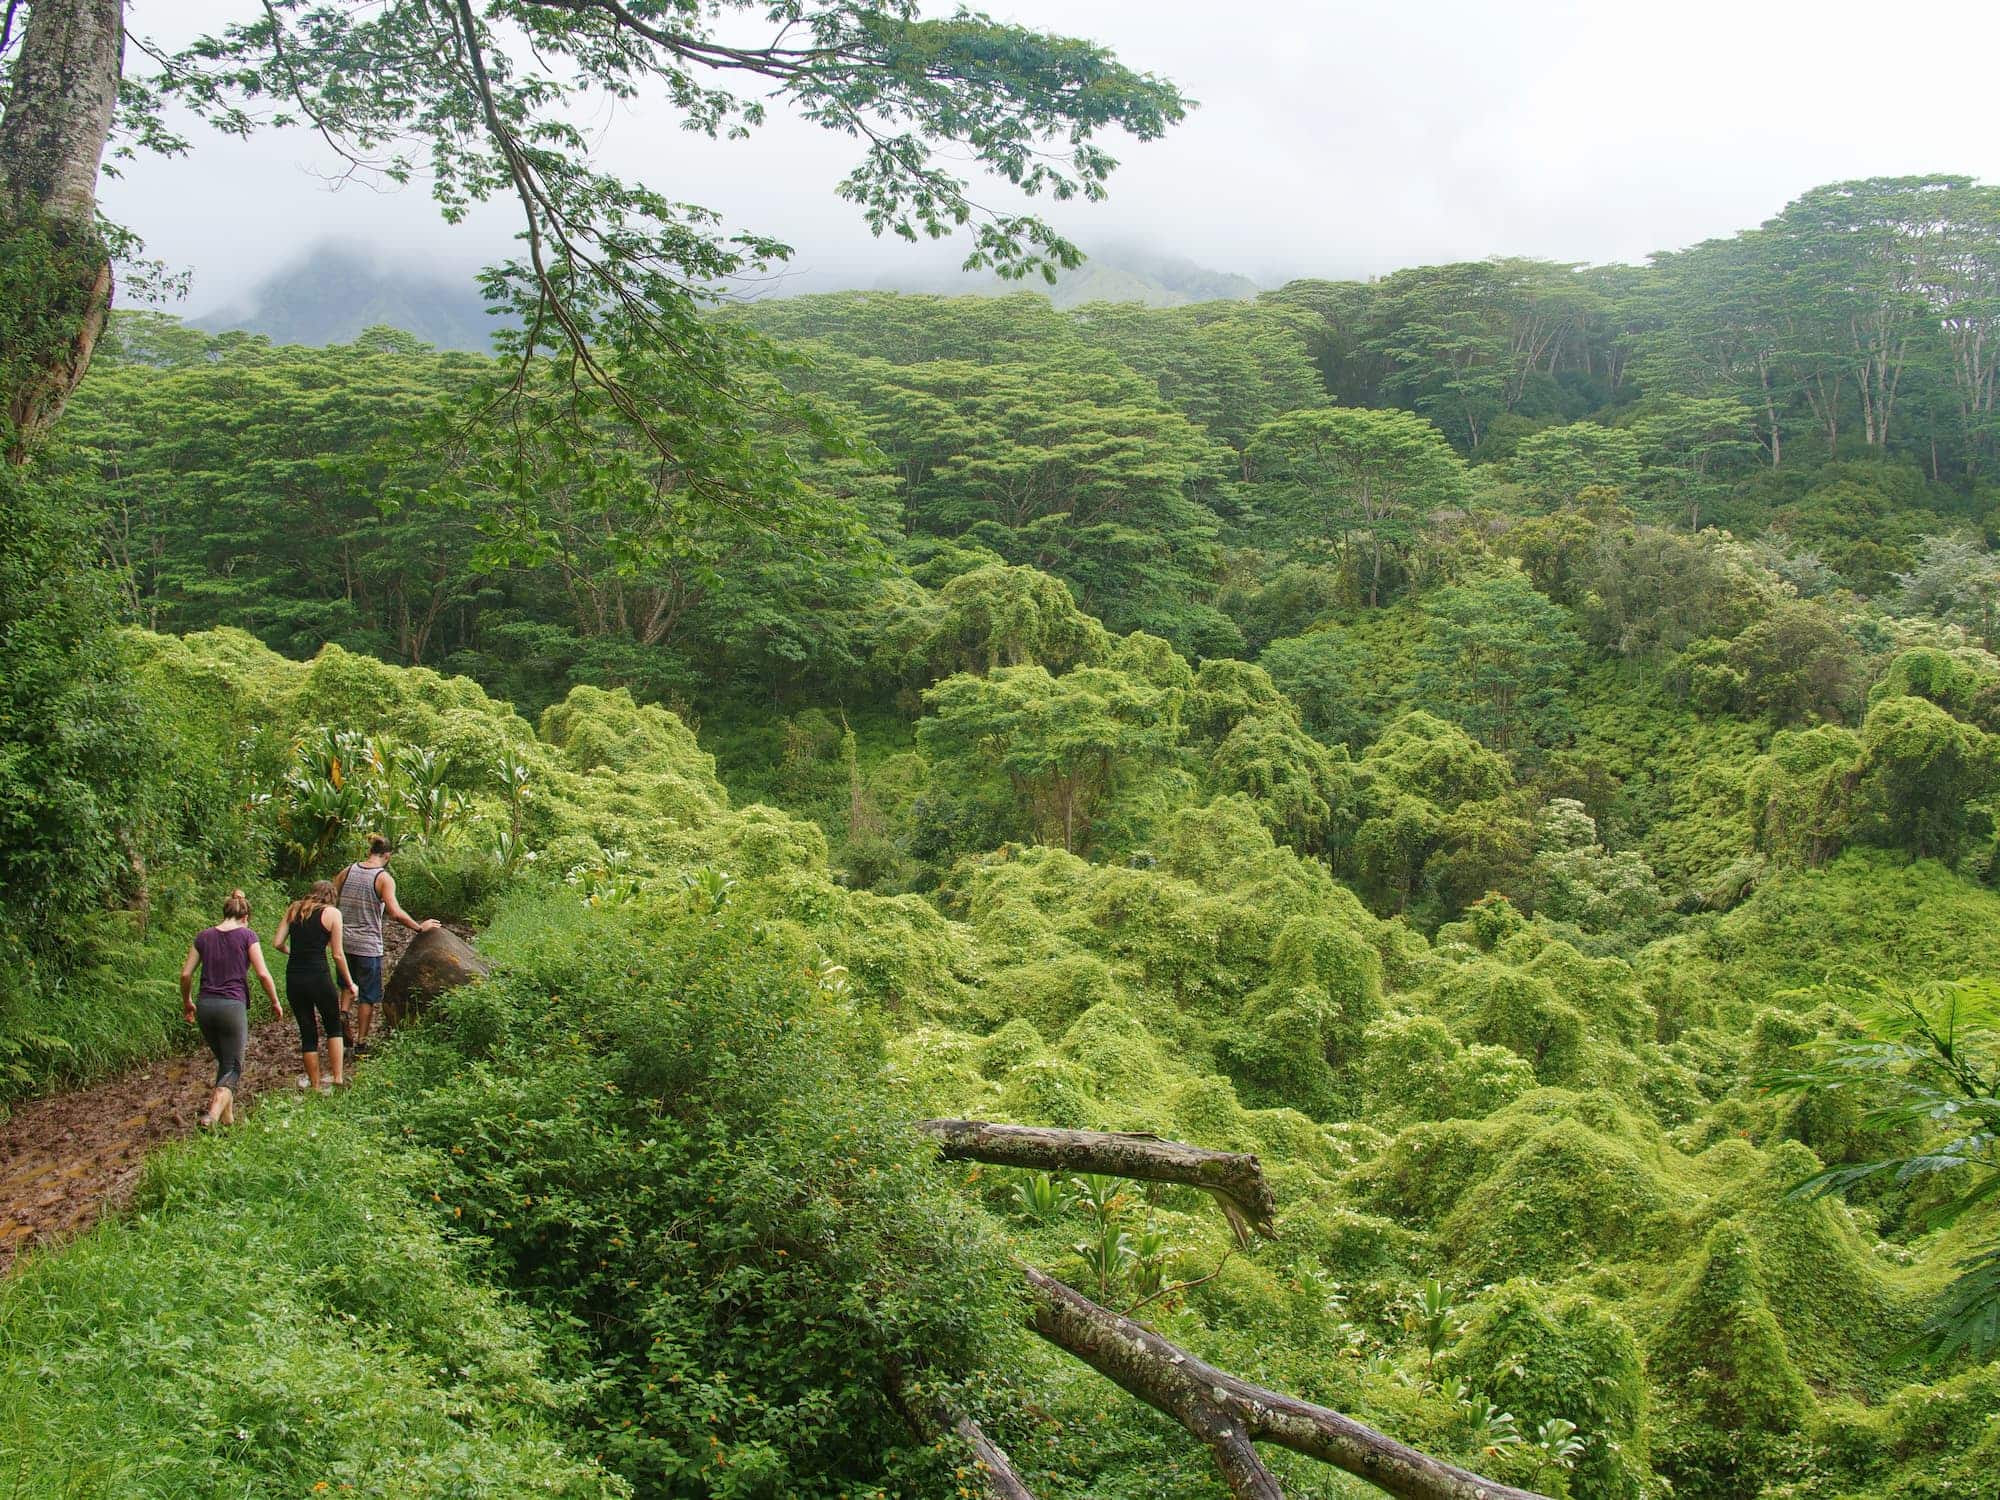 Kauaʻi: Our 5 favorite easy, intermediate, and difficult hikes